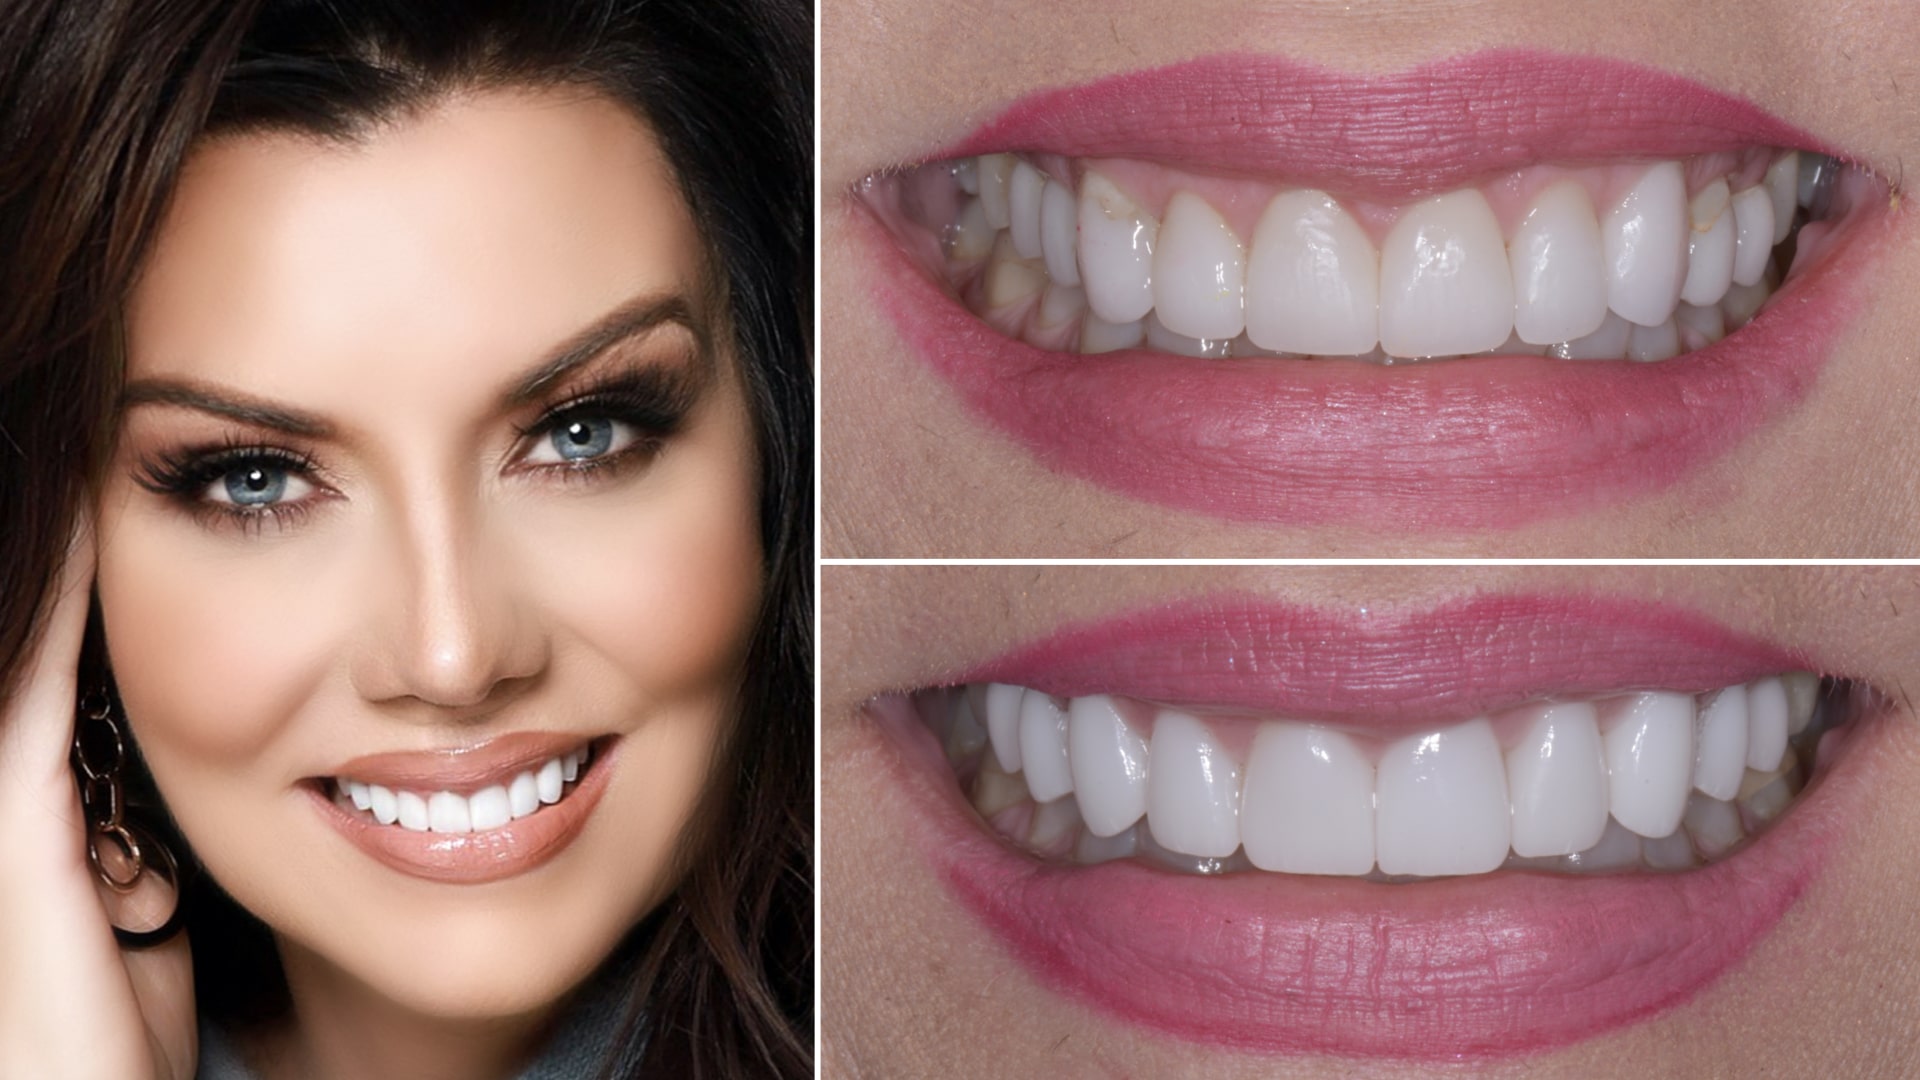 Woman's smile before and after cosmetic dentistry